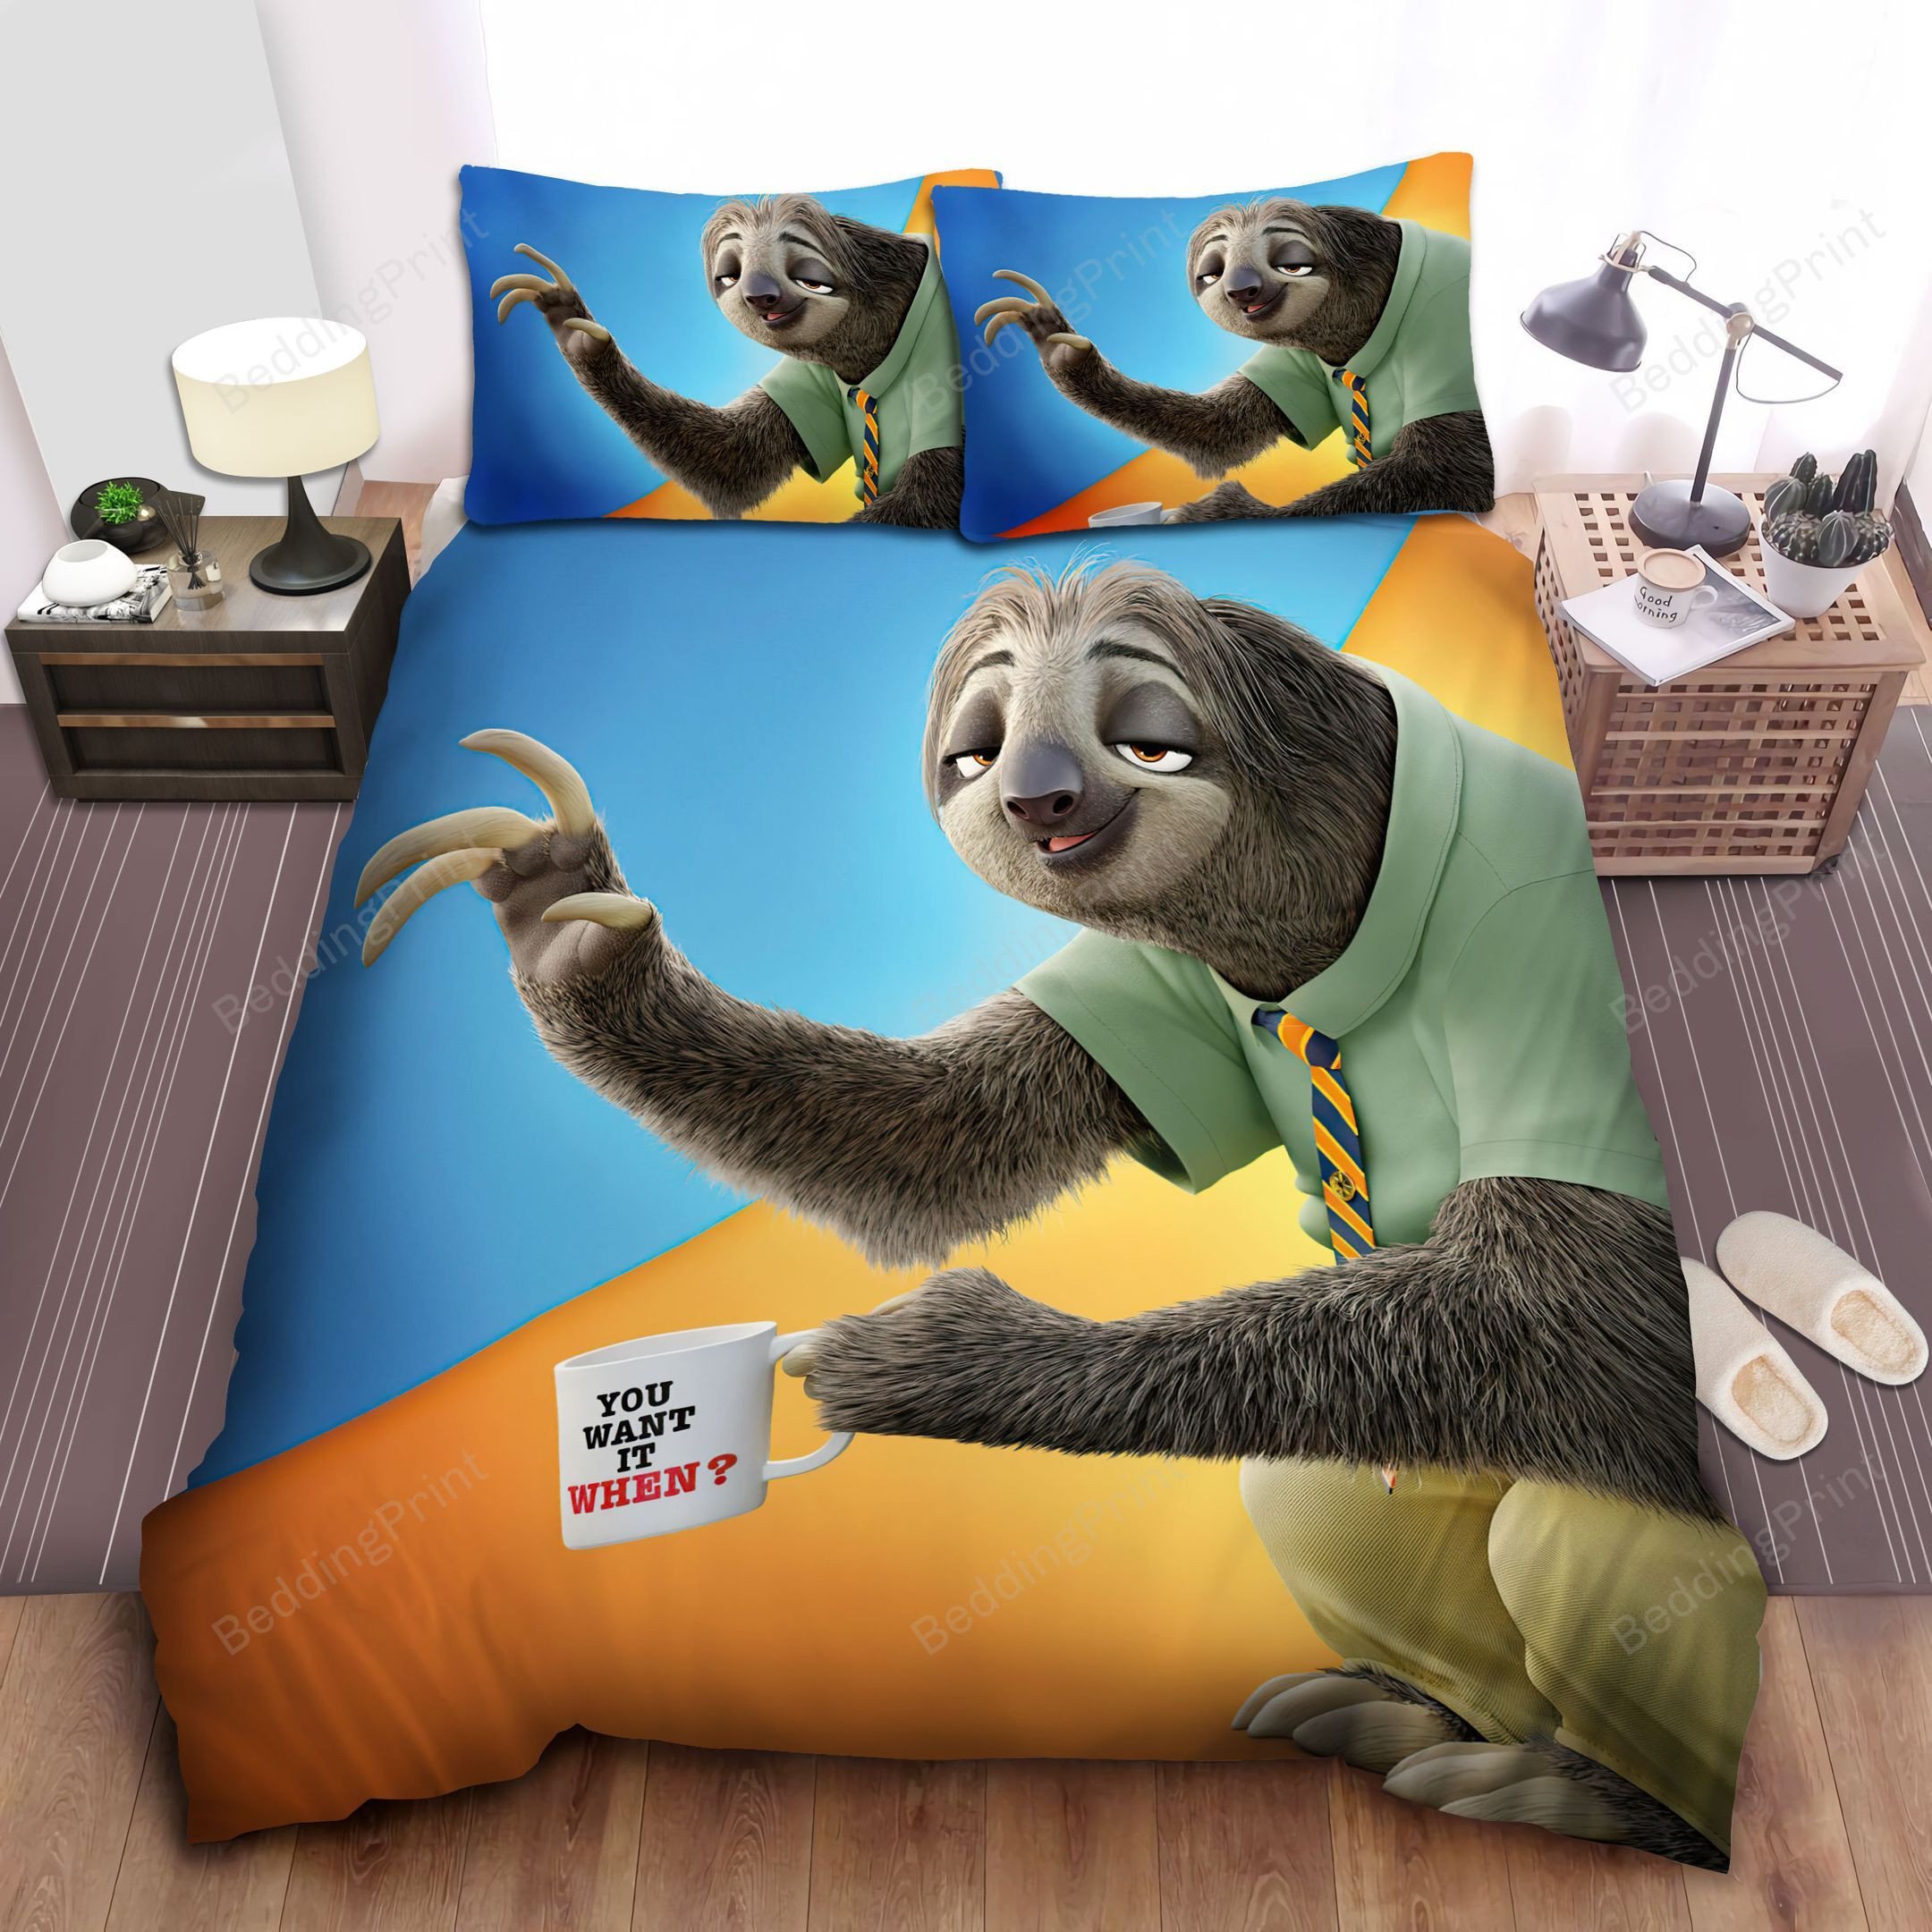 Zootopia Flash The Sloth Bed Sheets Duvet Cover Bedding Sets